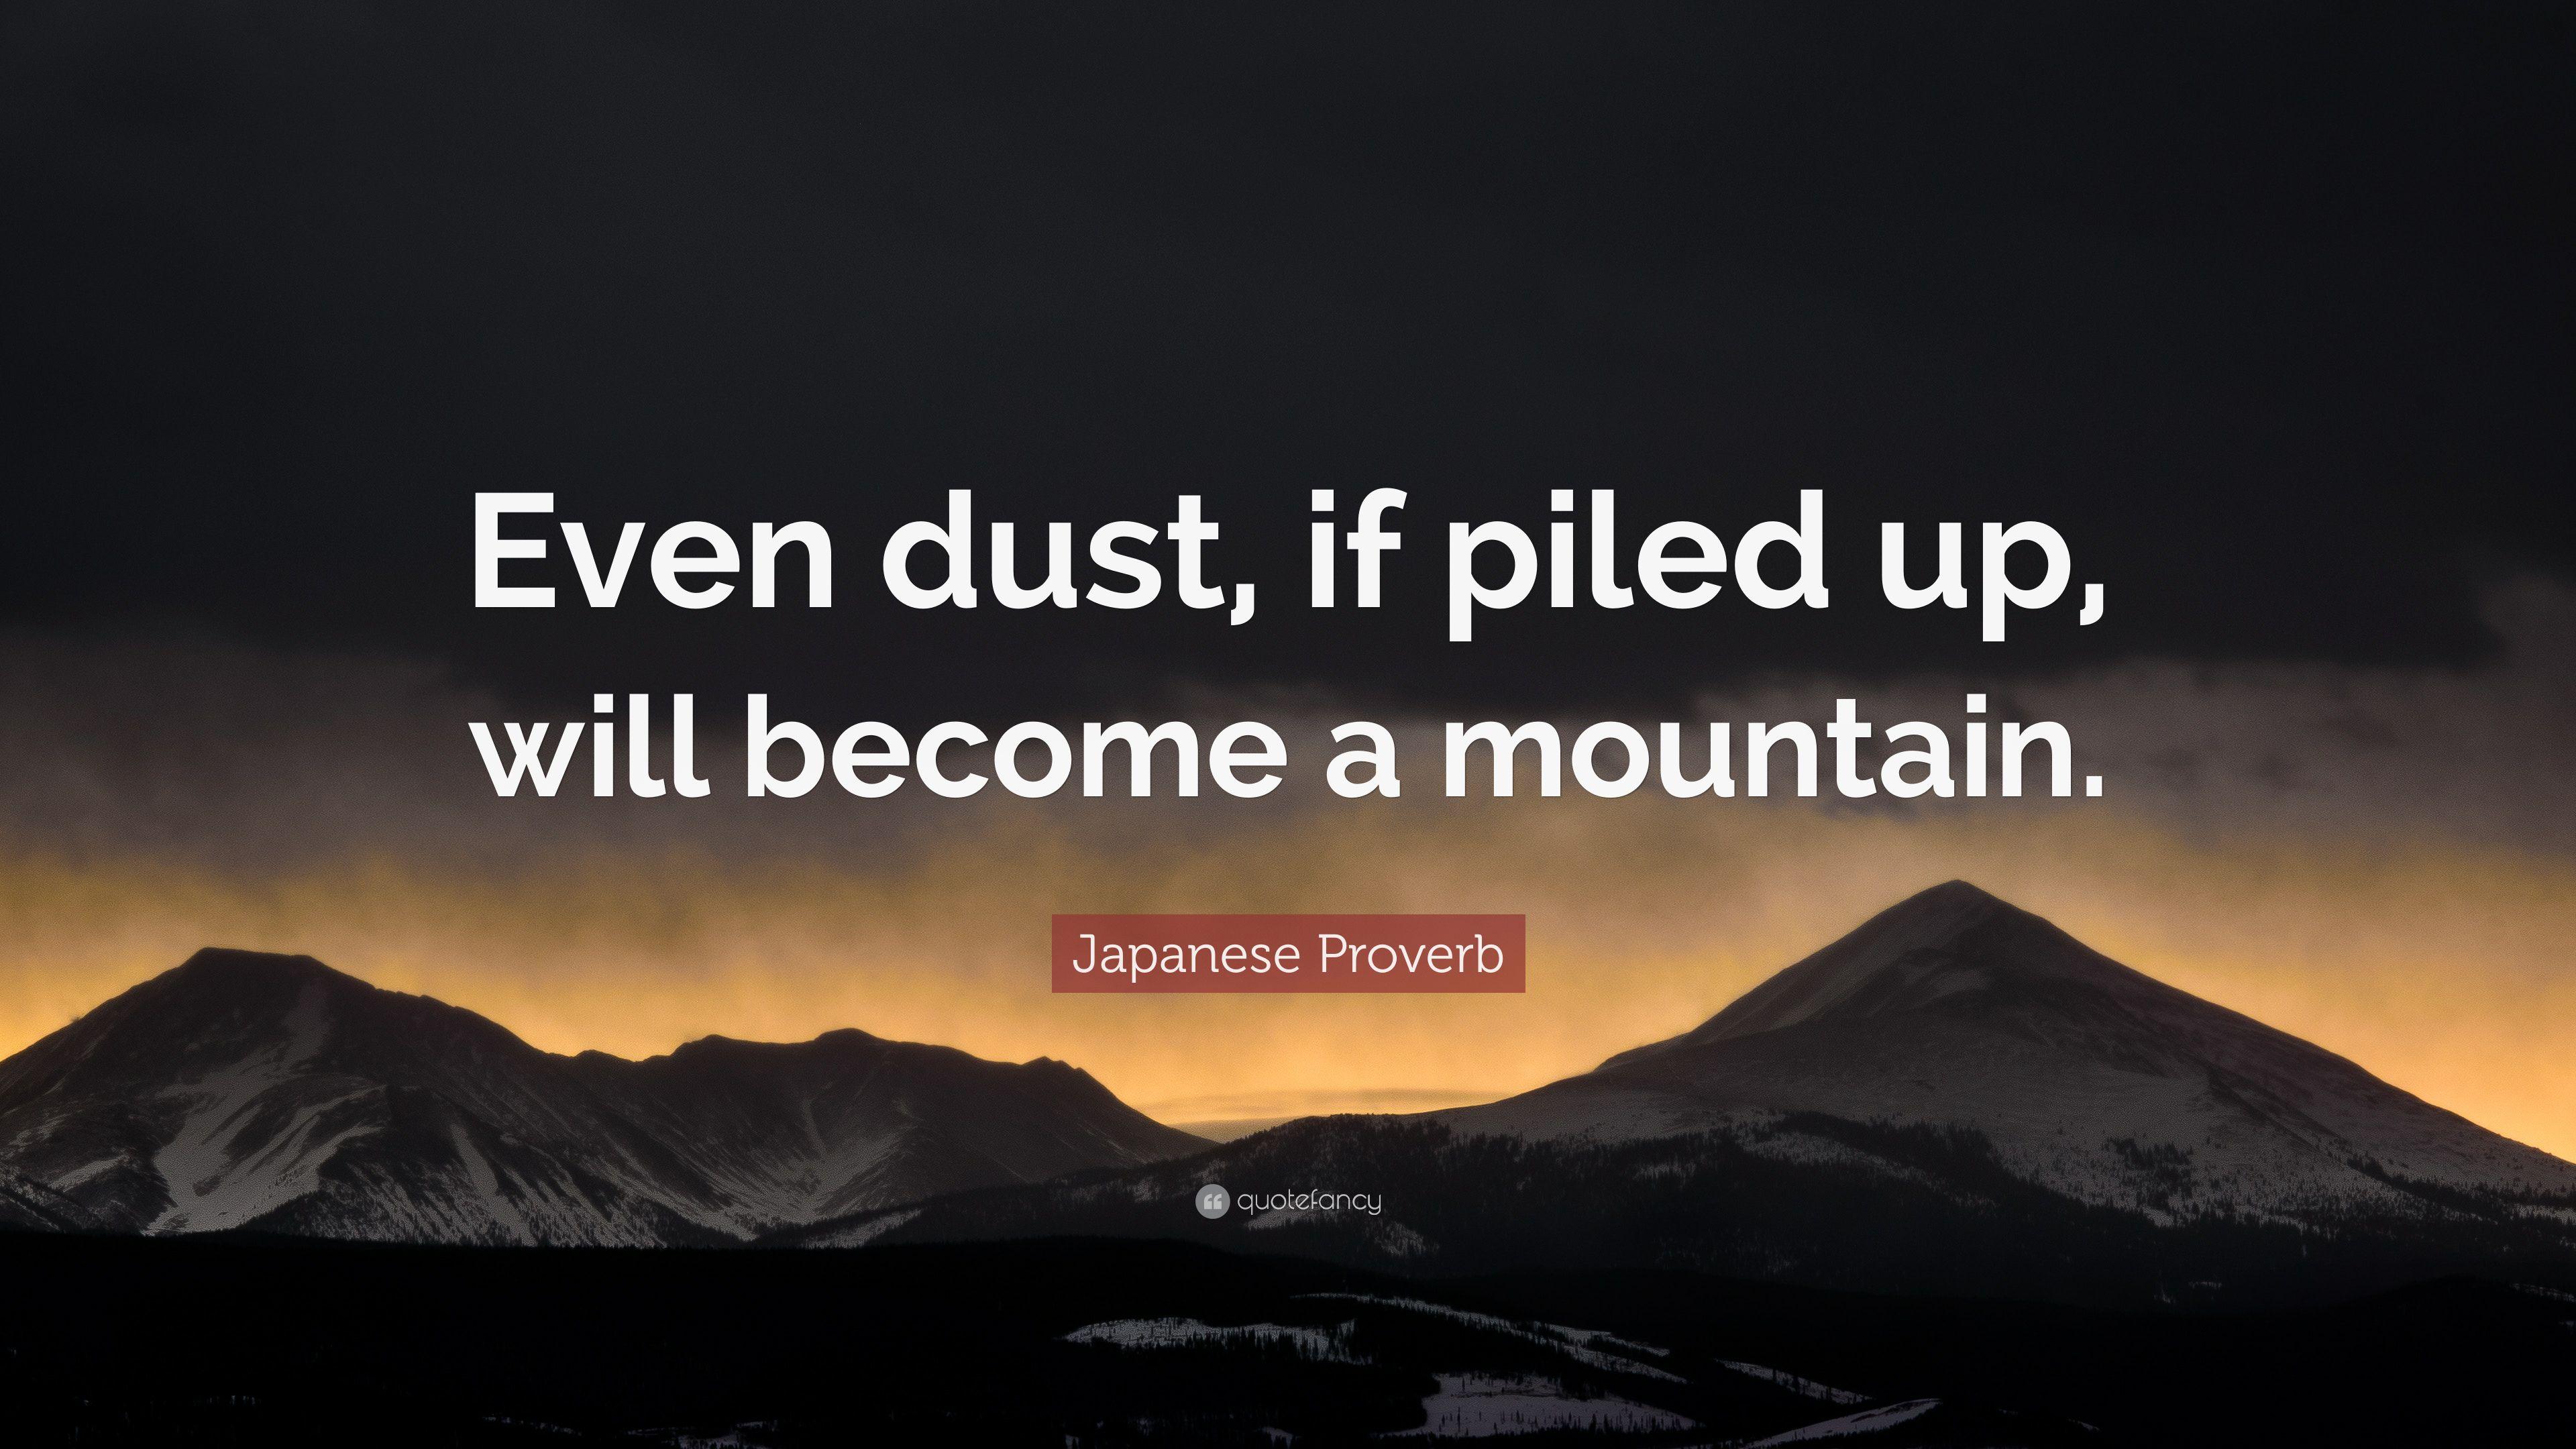 Japanese Proverb Quote: “Even dust, if piled up, will become a mountain.” (11 wallpaper)